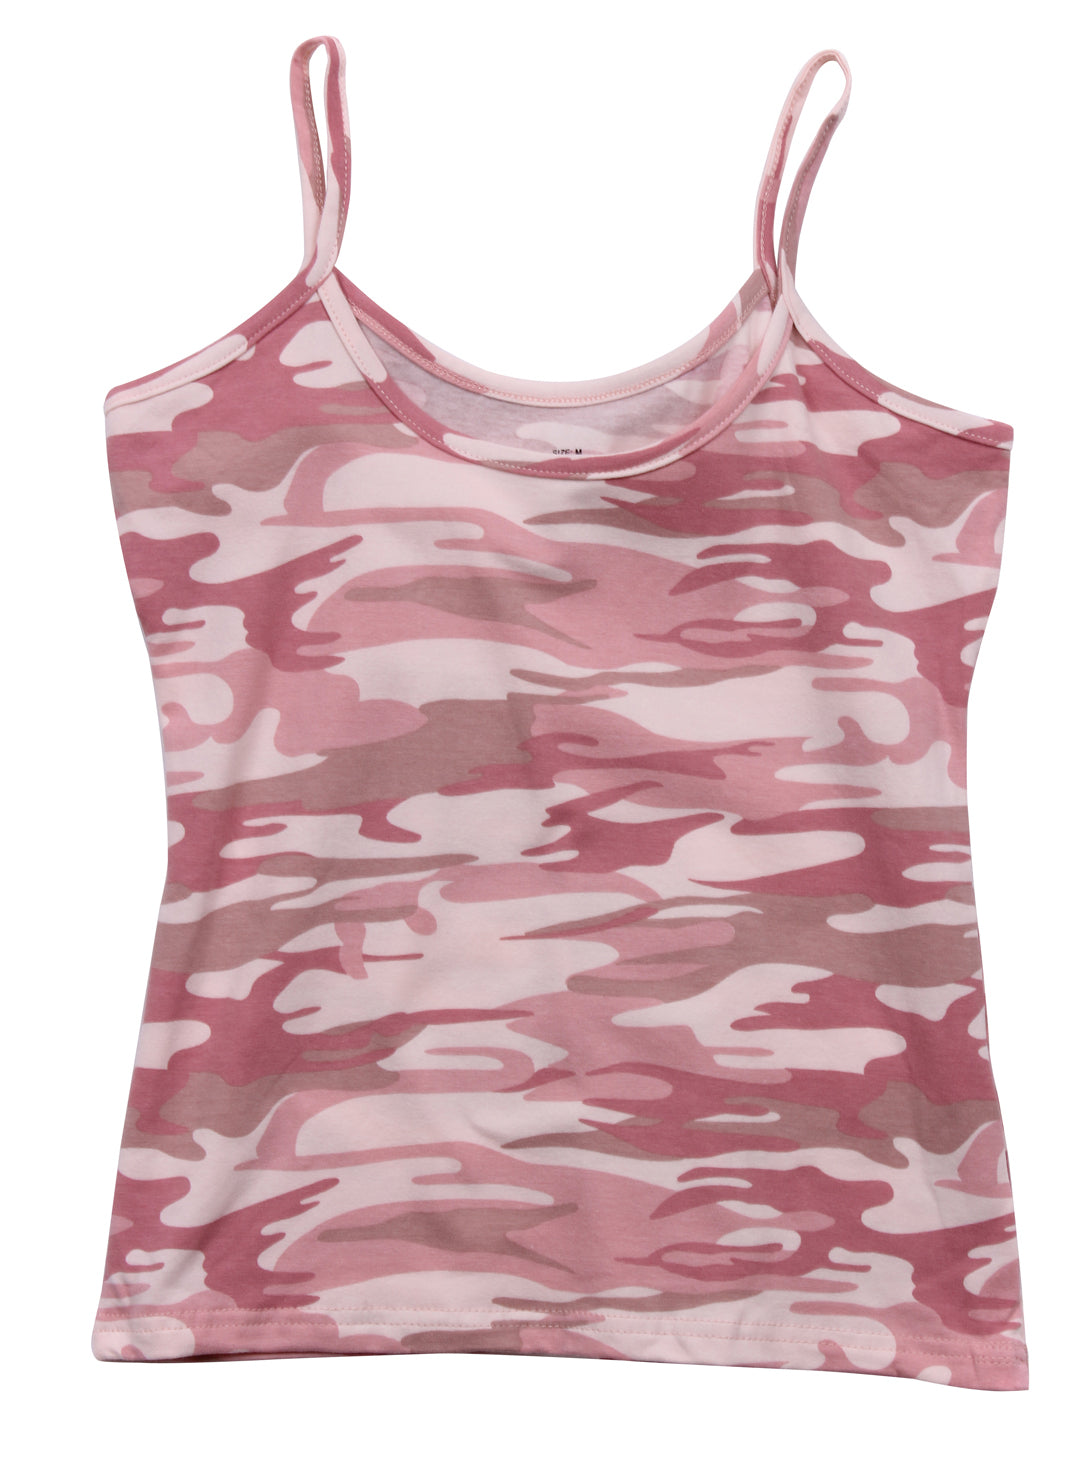 Milspec Baby Pink Camo "Booty Camp" Booty Shorts & Tank Top Booty Short Collection & Underwear MilTac Tactical Military Outdoor Gear Australia